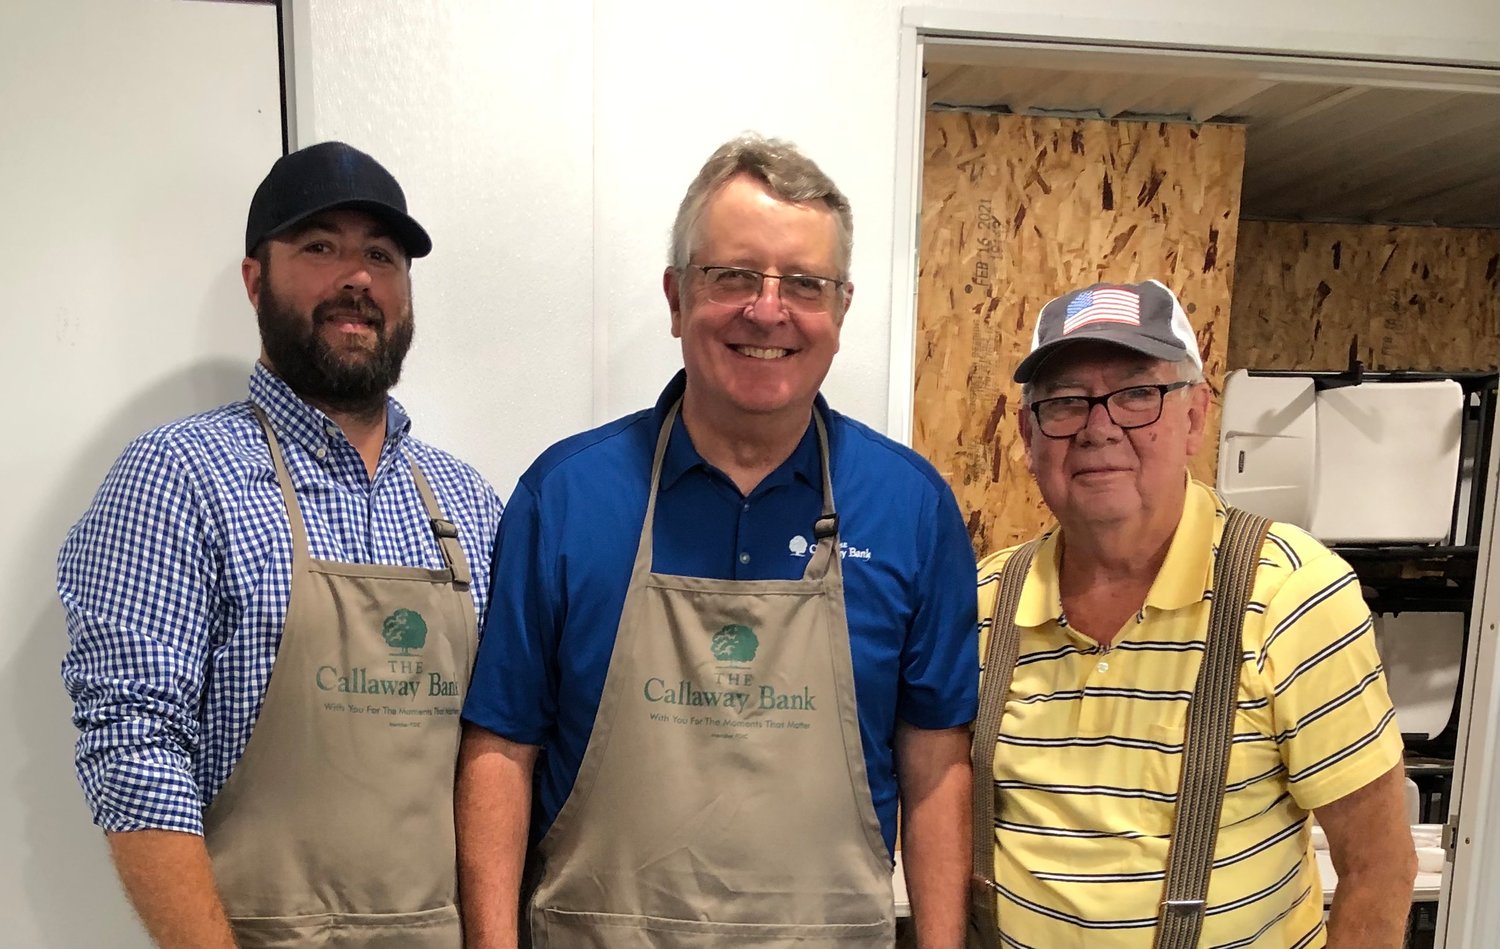 The Callaway Bank team served Tuesday of Loafer's Week in Auxvasse. Among employees taking part, from left, were Cody Whalen and Garry Melton. They are joined by Donald Knipp, Auxvasse Lions Club. [Submitted Photo]